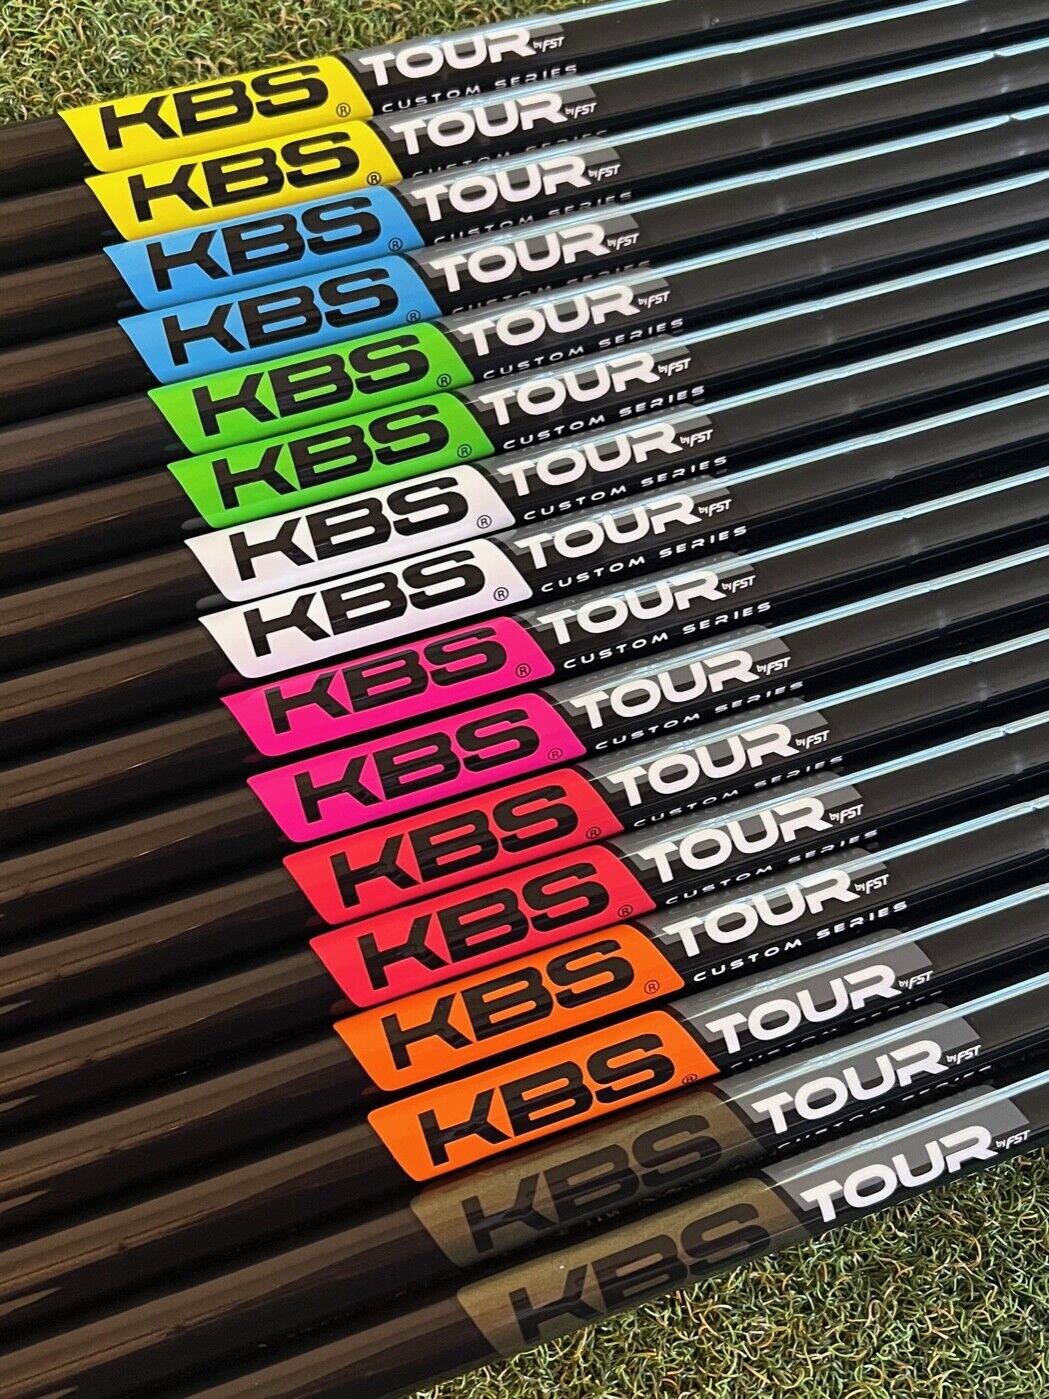 KBS Tour Custom Series Black Pearl Wedge Shafts Pointe conique .355